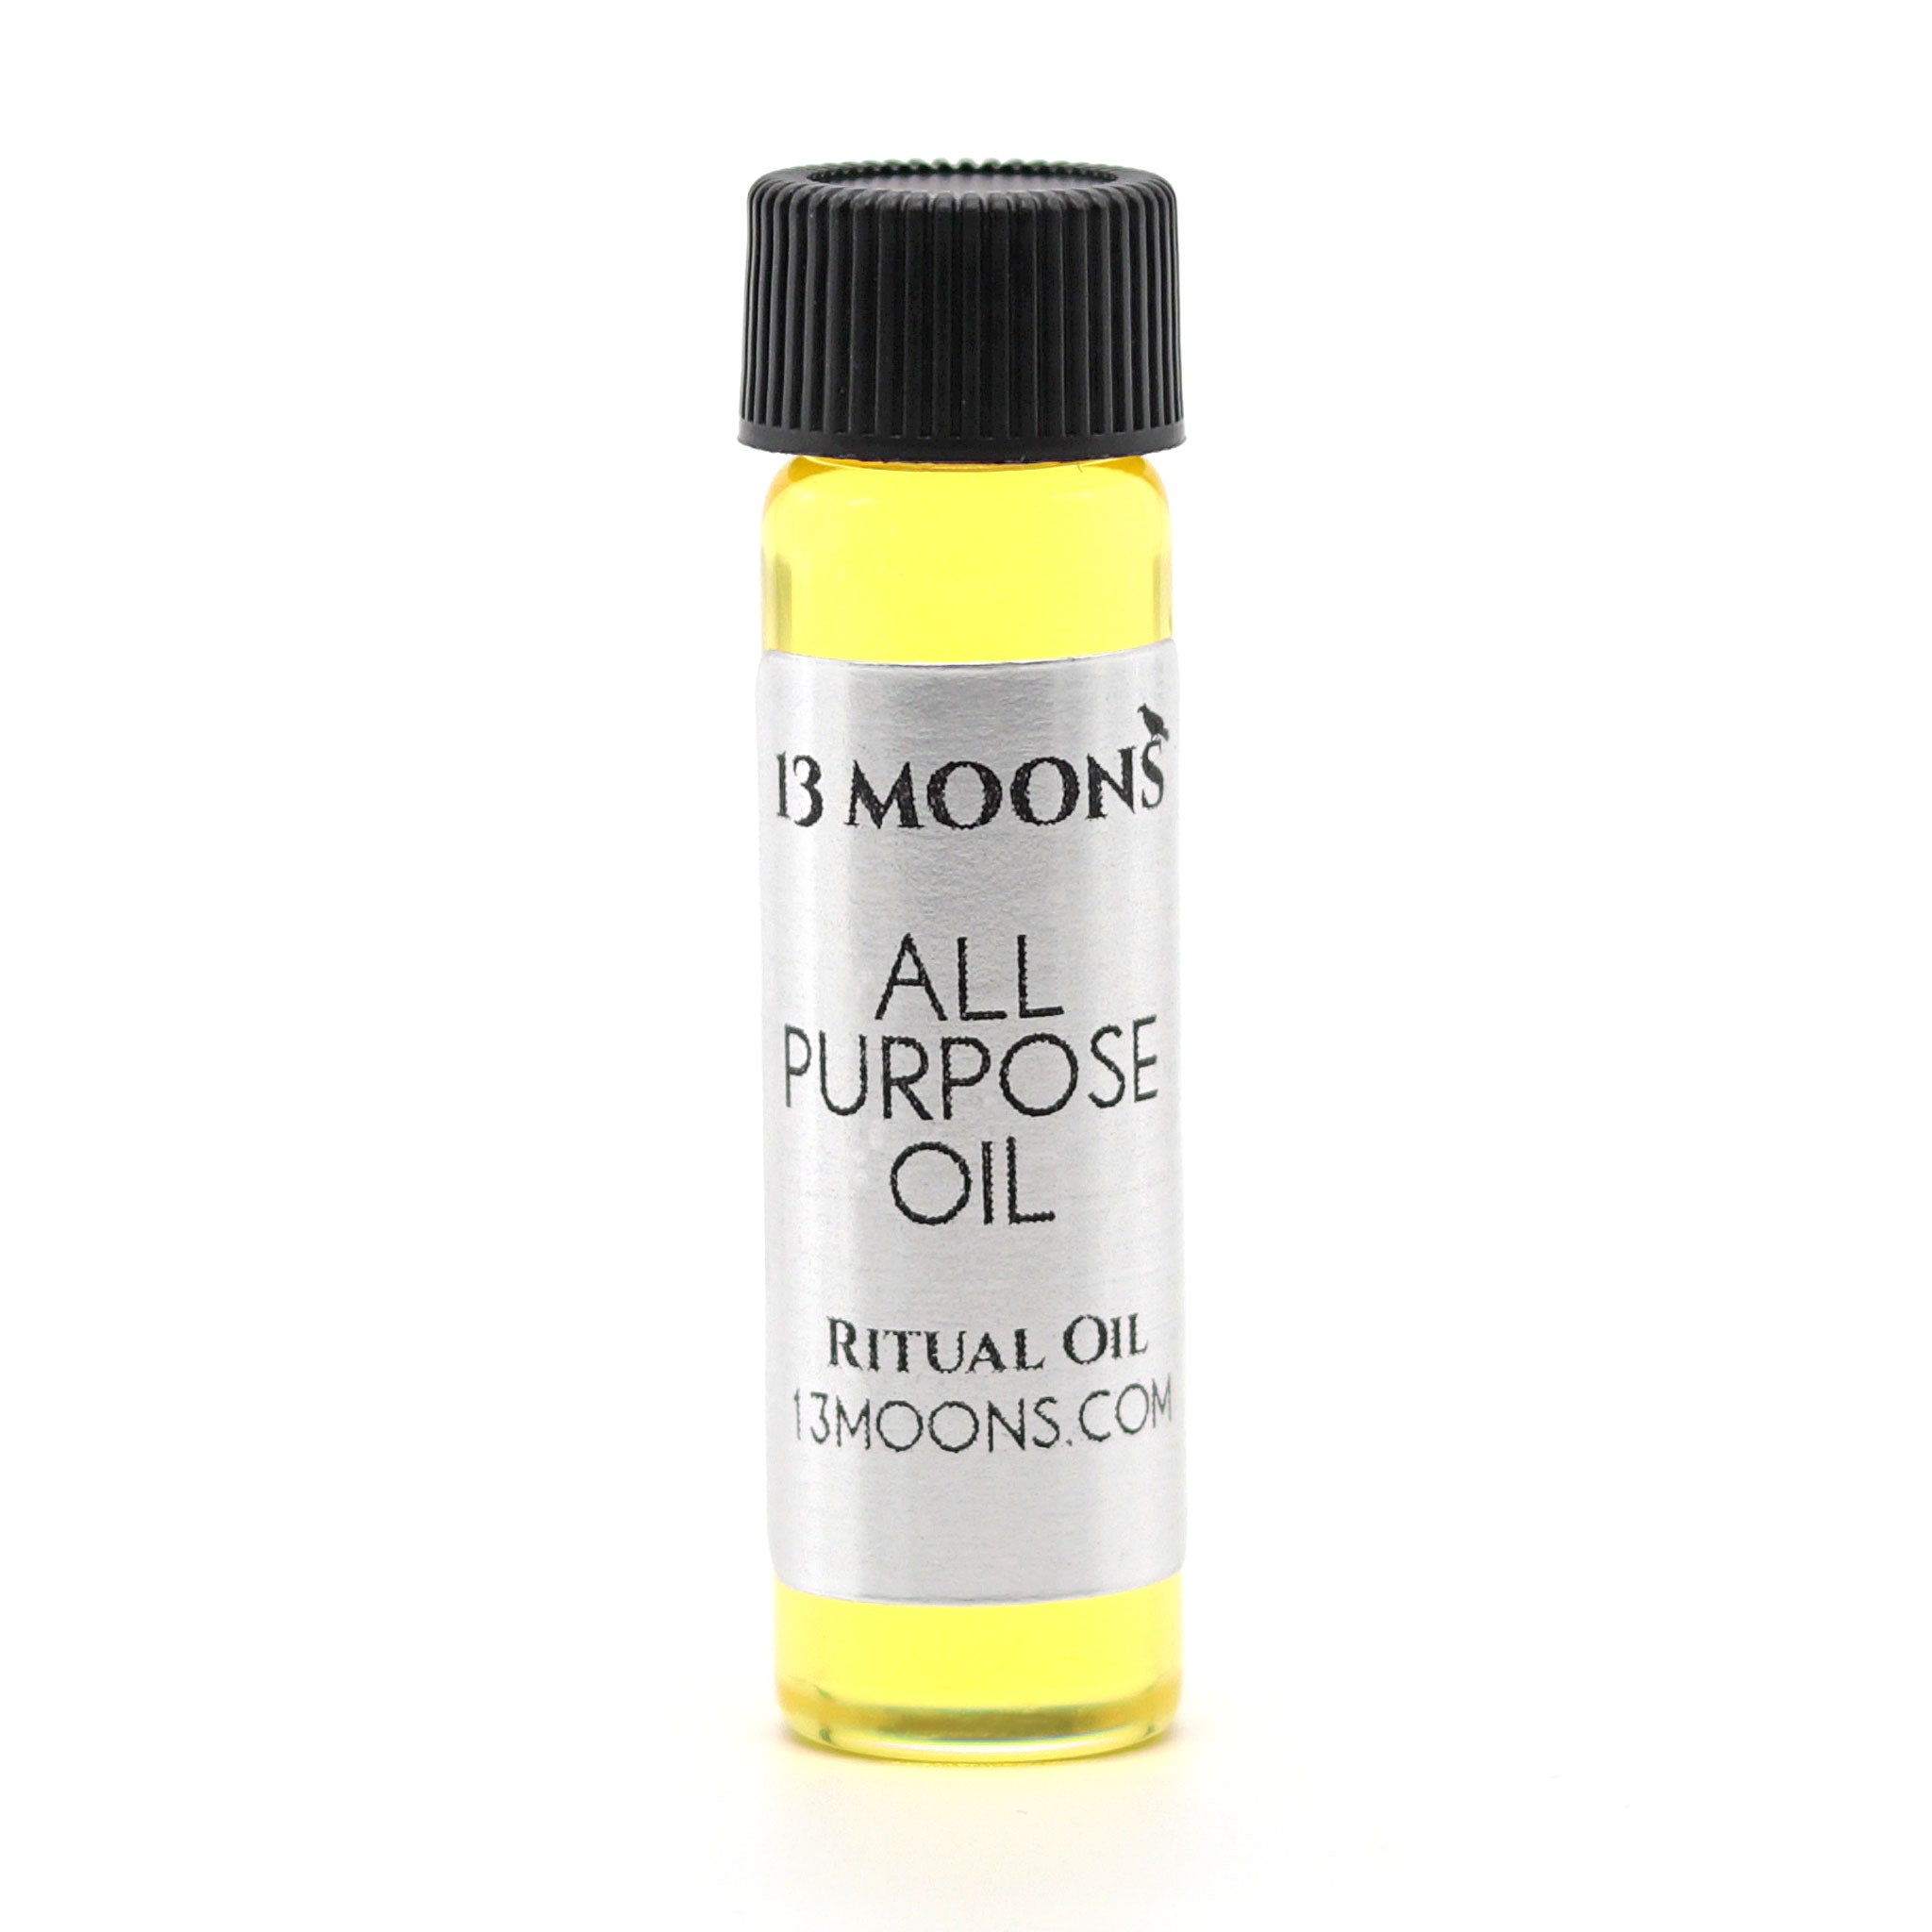 All Purpose Oil by 13 Moons - 13 Moons